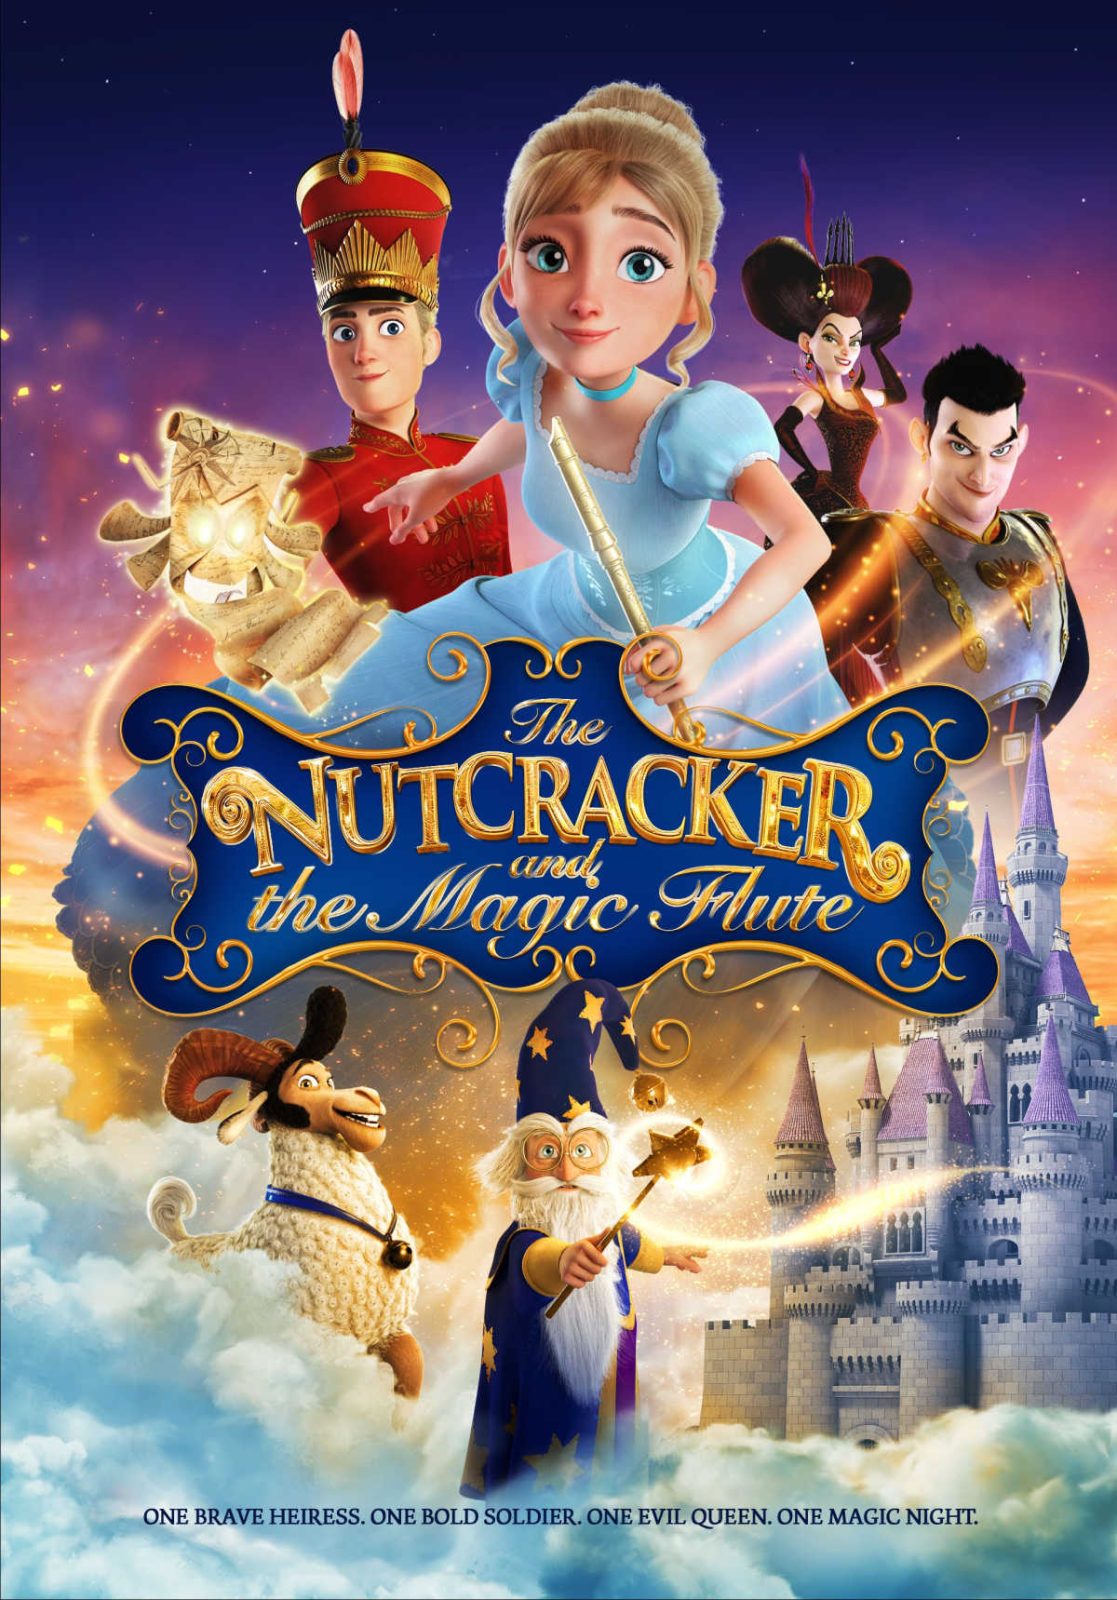 Enjoy the classic holiday tale in a new way, when you watch the animated Nutcracker and the Magic Flute movie. 